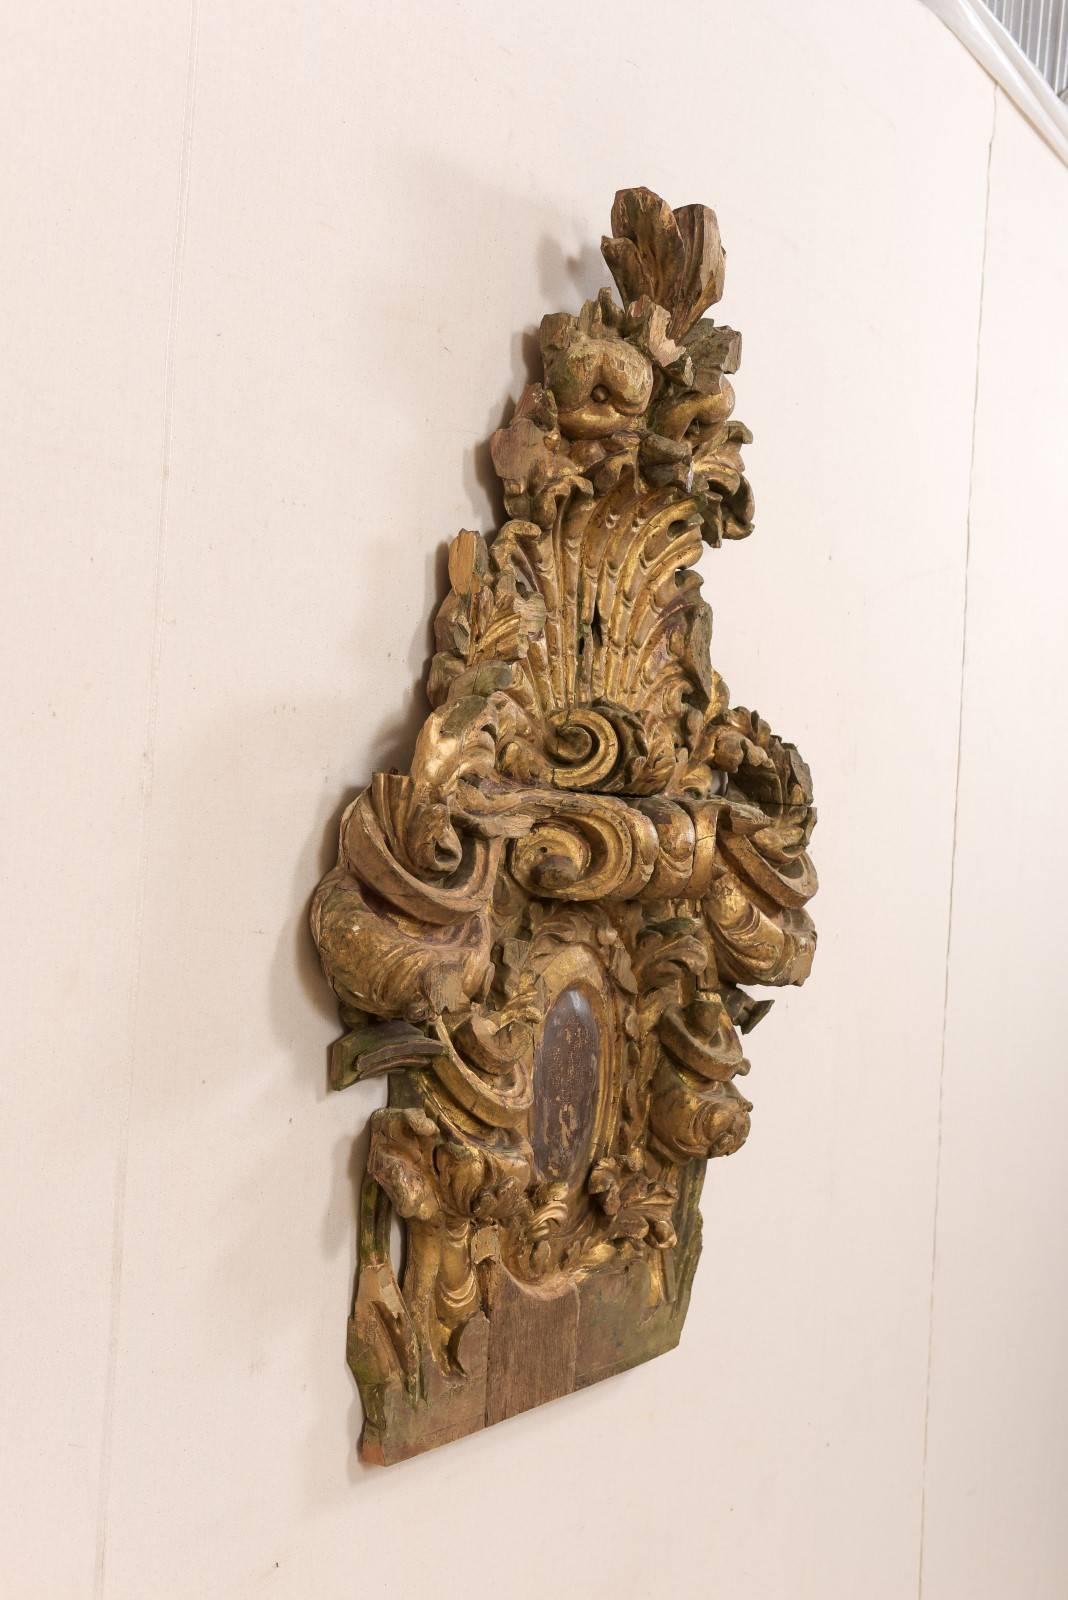 Giltwood 18th Century Italian Rococo Carved Wood Architectural Fragment Wall Decoration